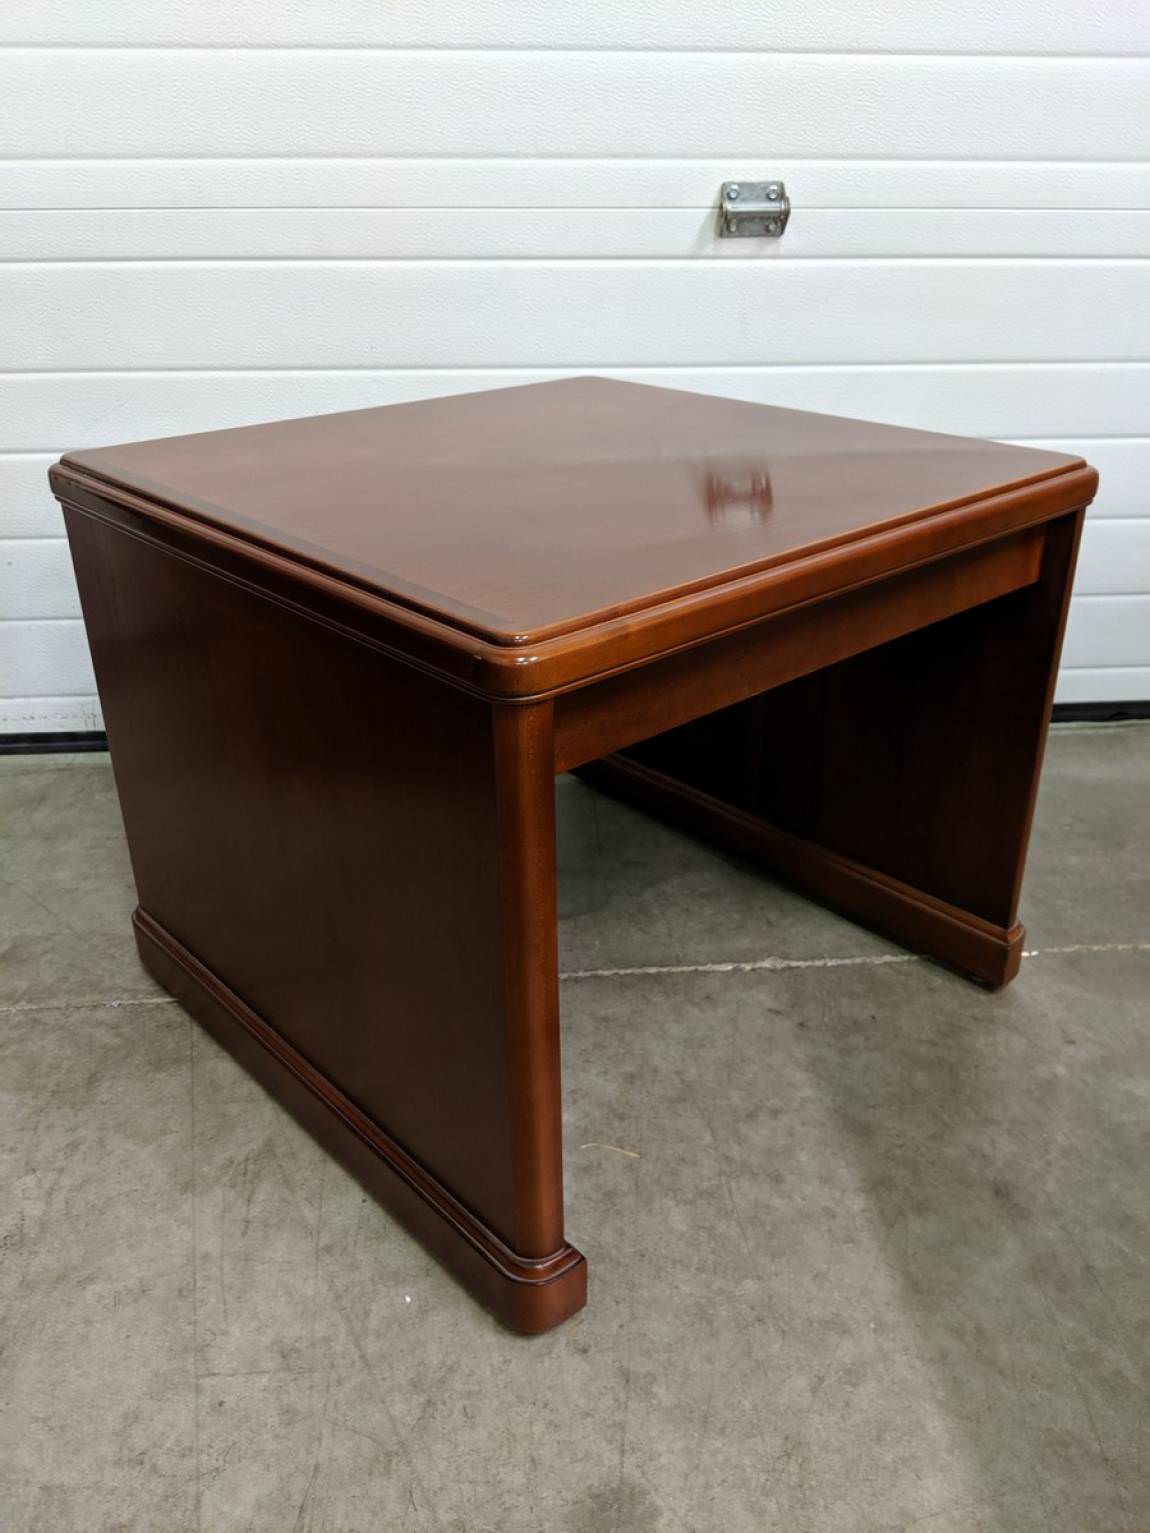 Solid Wood Cherry End Table – 24x24